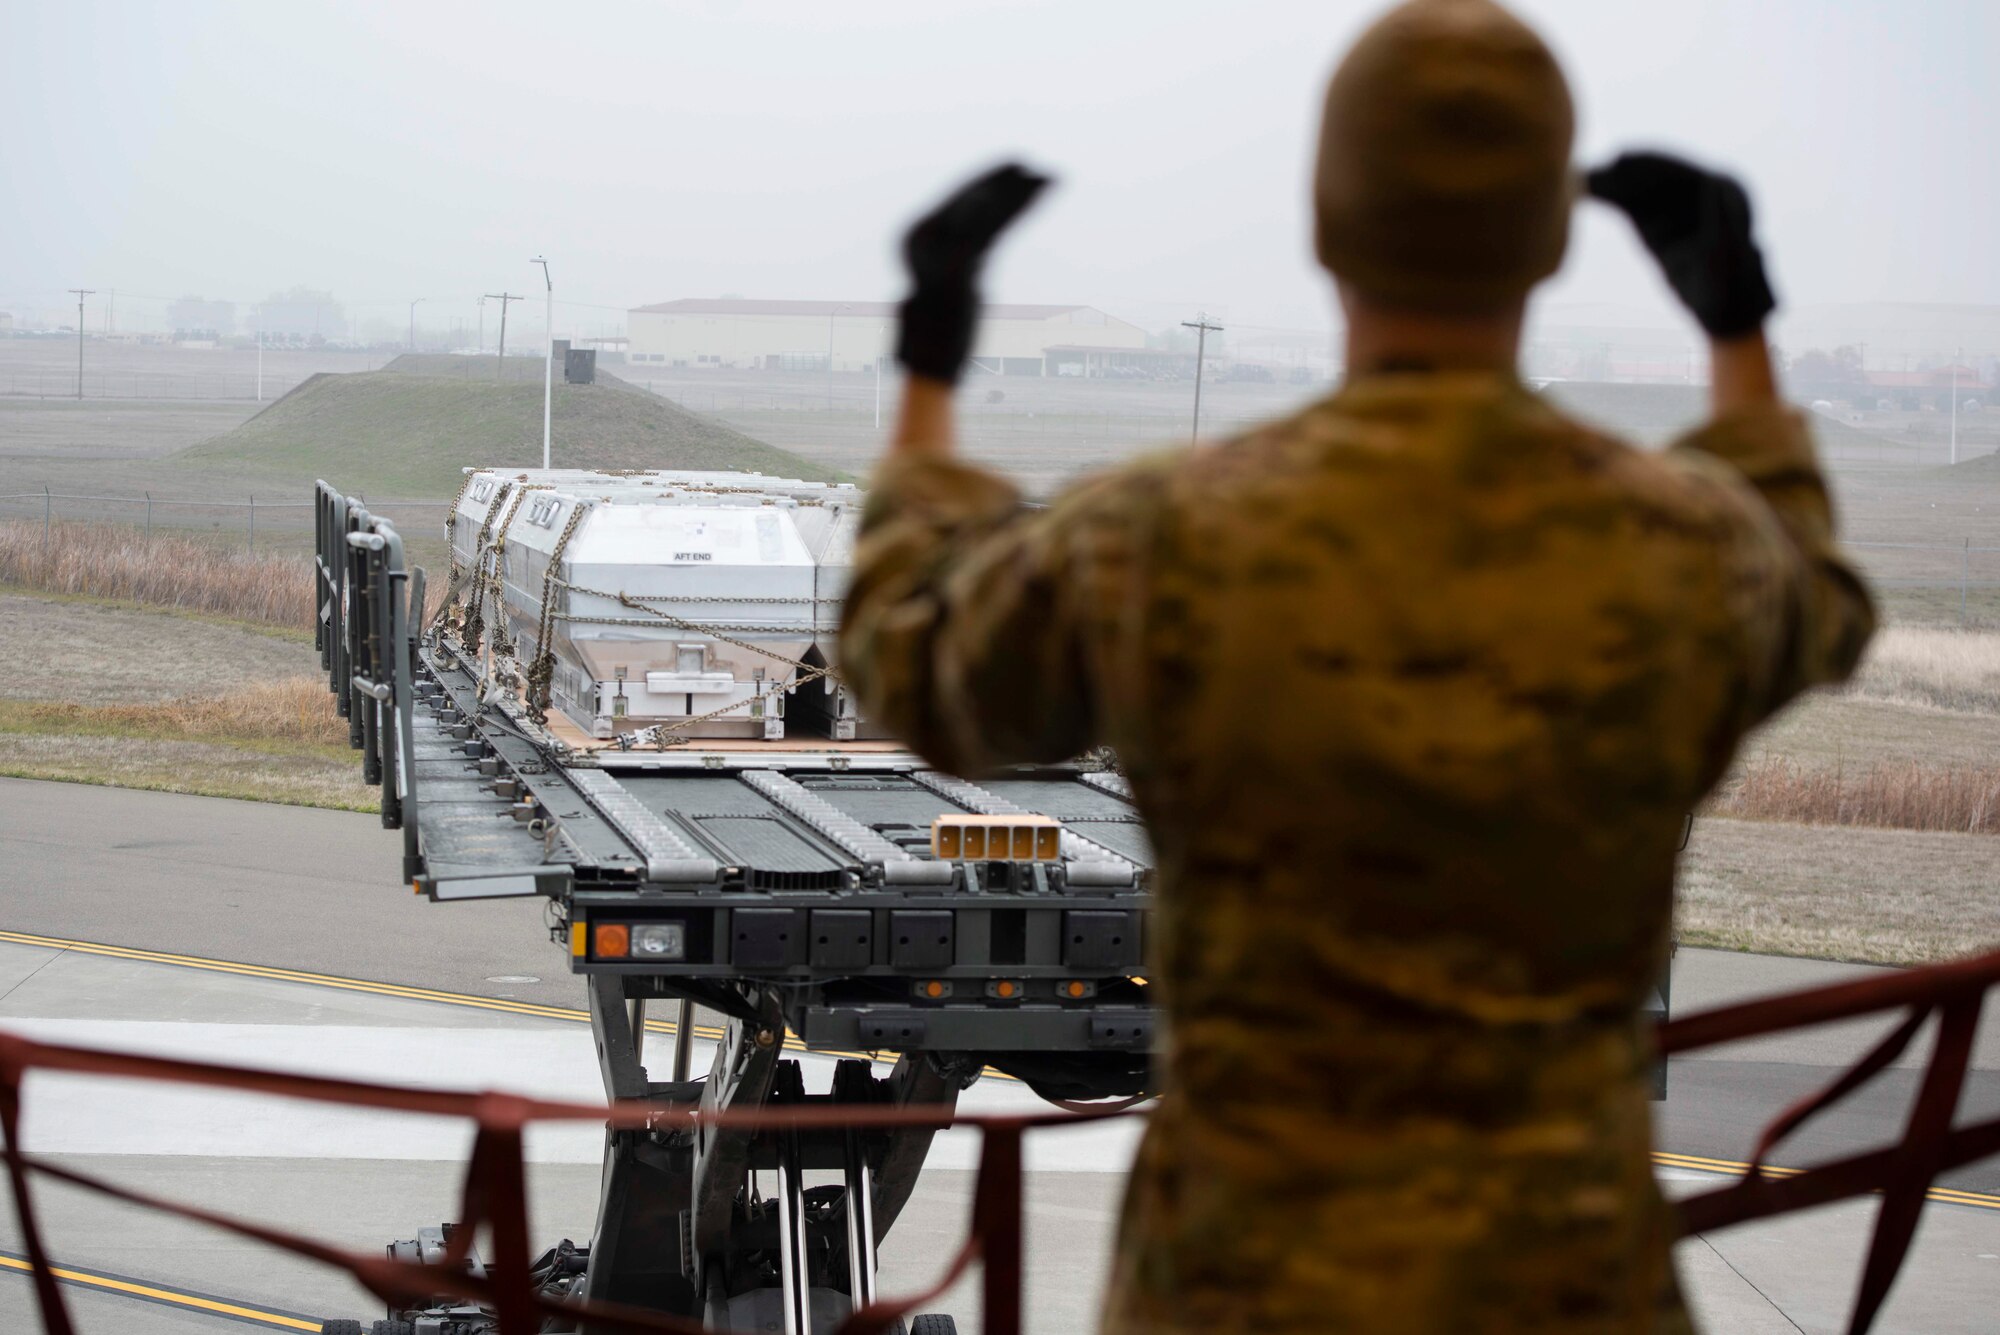 A military member stands inside a large military aircraft while a large military transport vehicle is driven towards them to be loaded on to the aircraft.